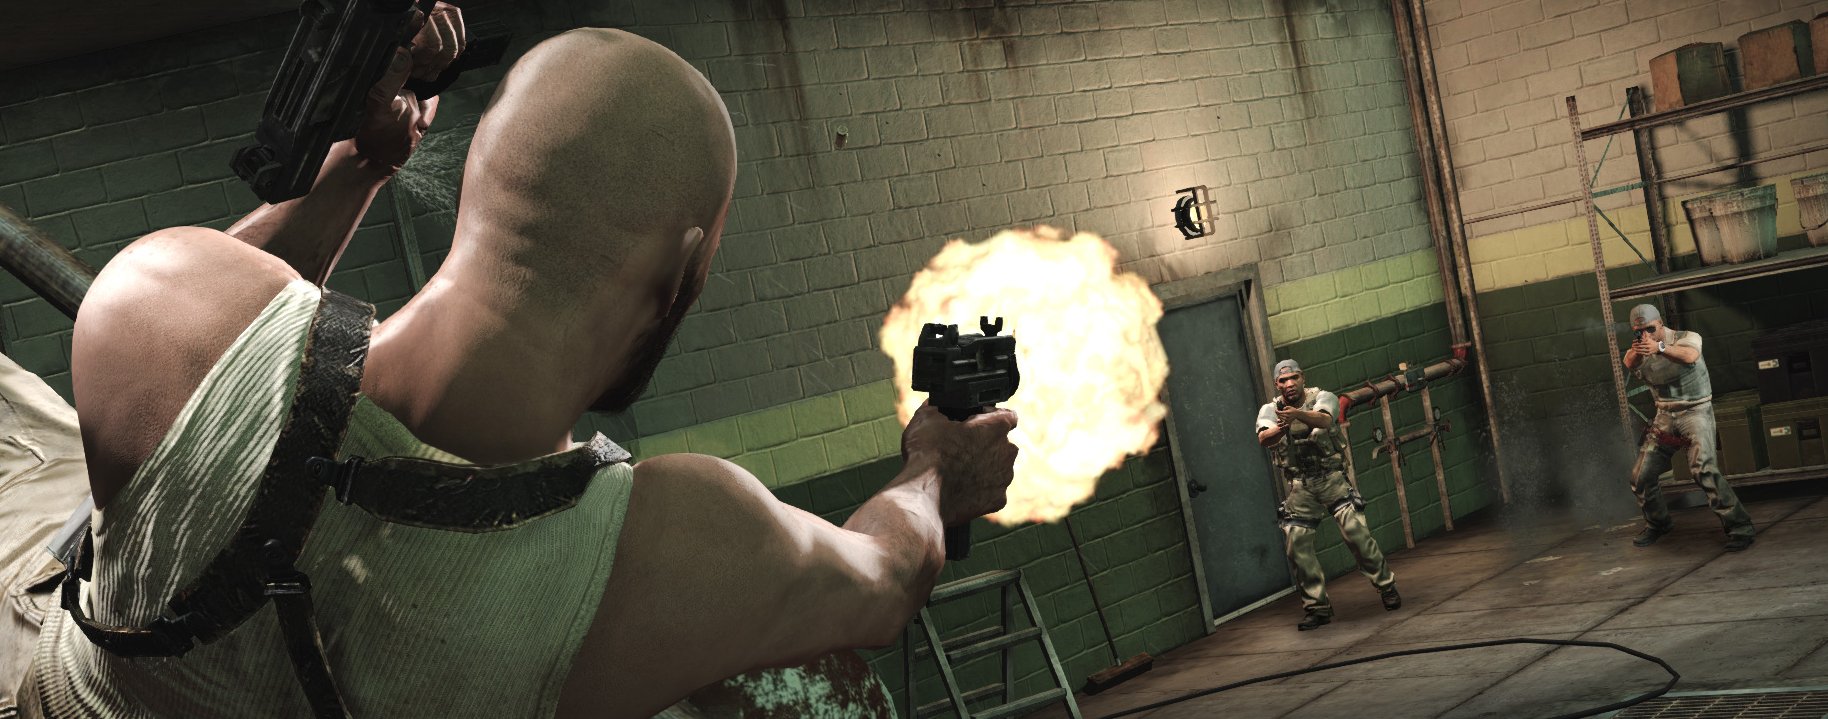 max payne 3 game of the year edition